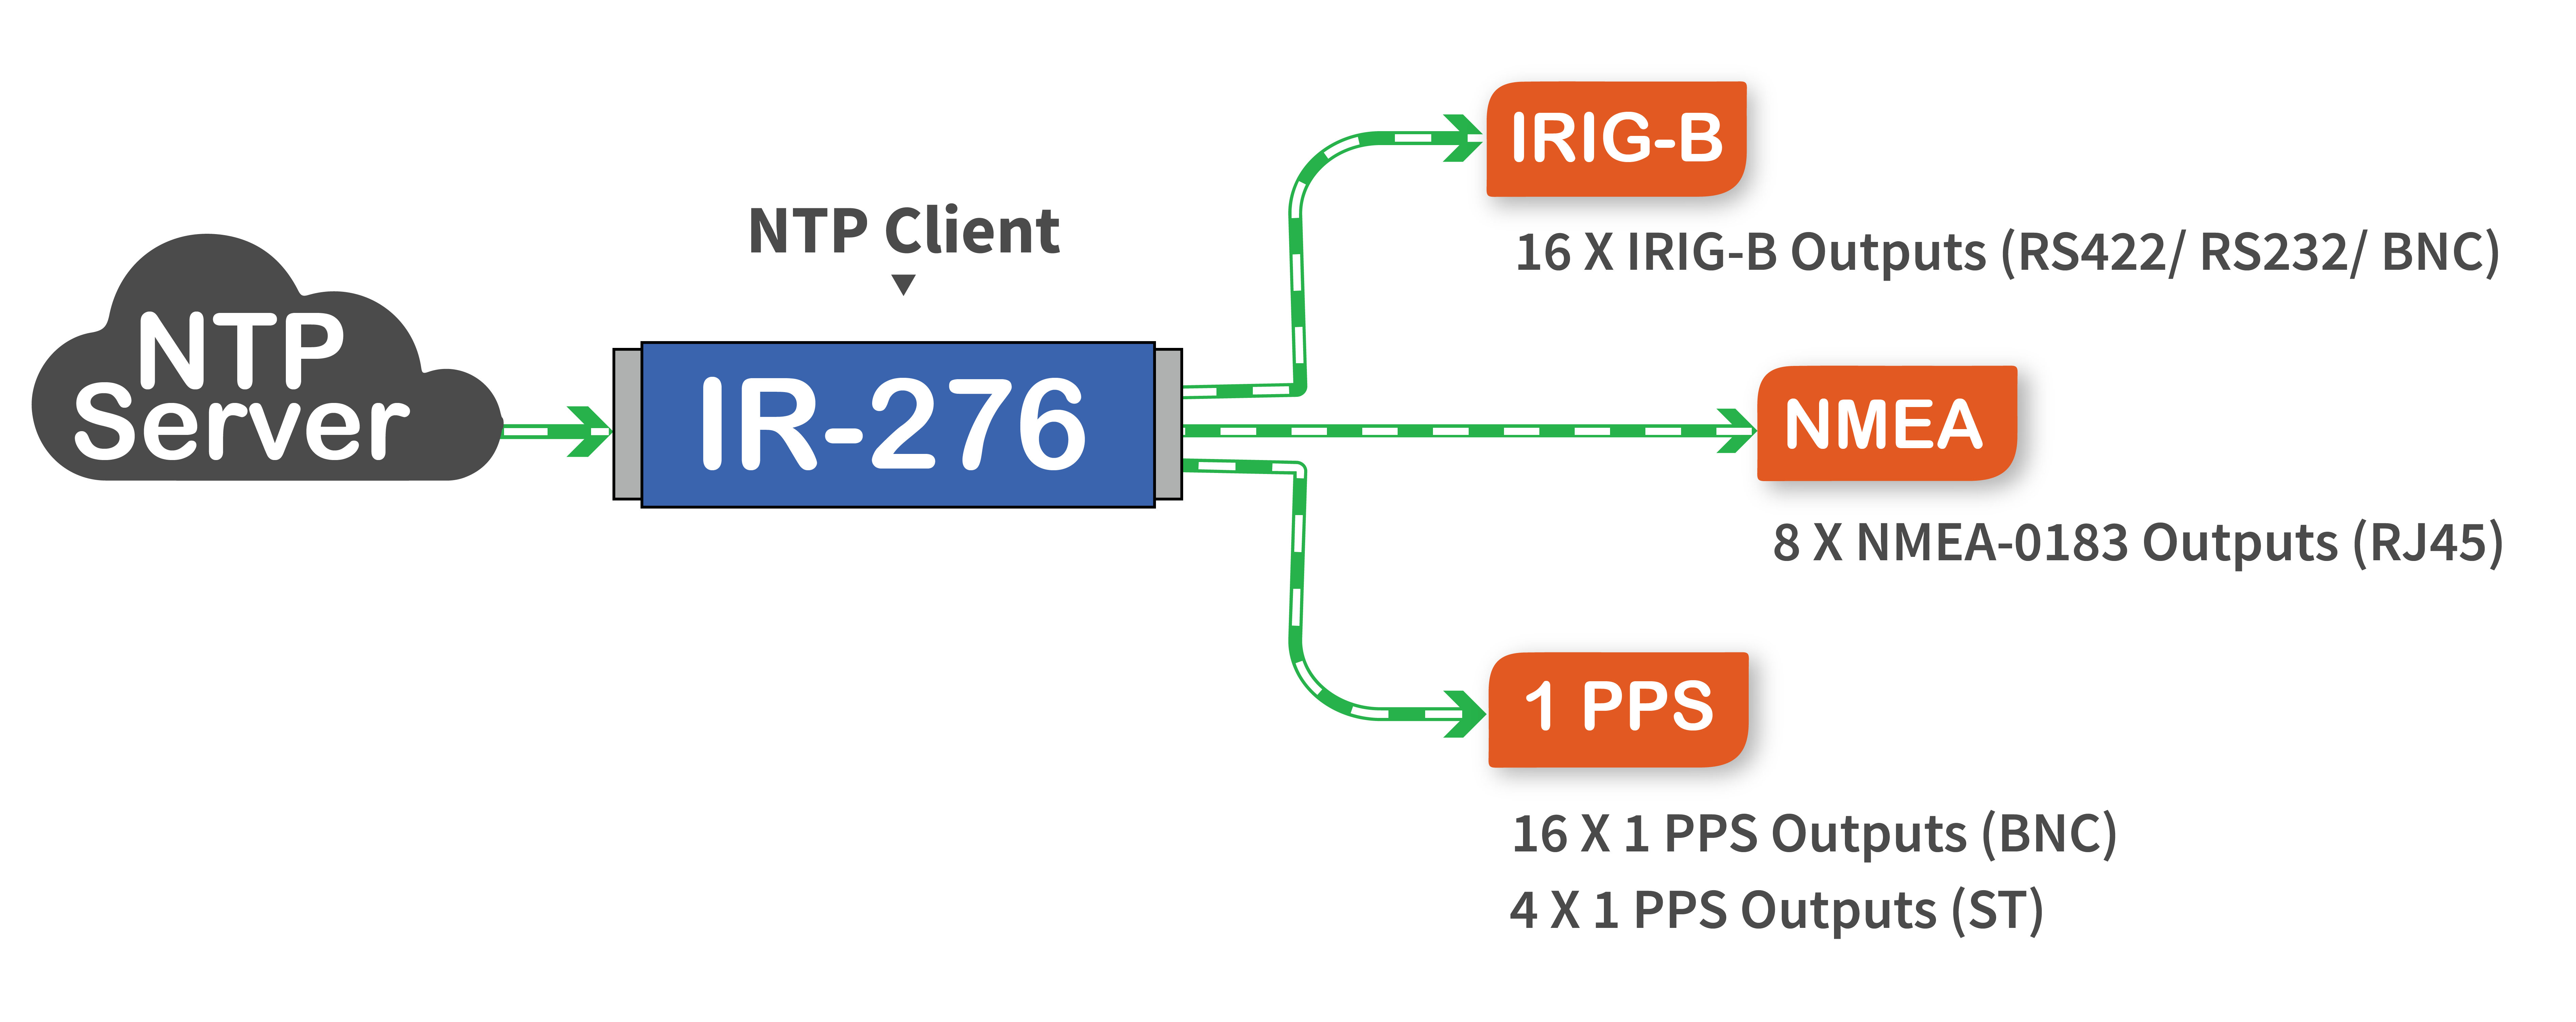 Application diagram showing the IR-276 NTP client port synchronized to an NTP Server and 4 x IRIG-B outputs synchronized to NTP timecode